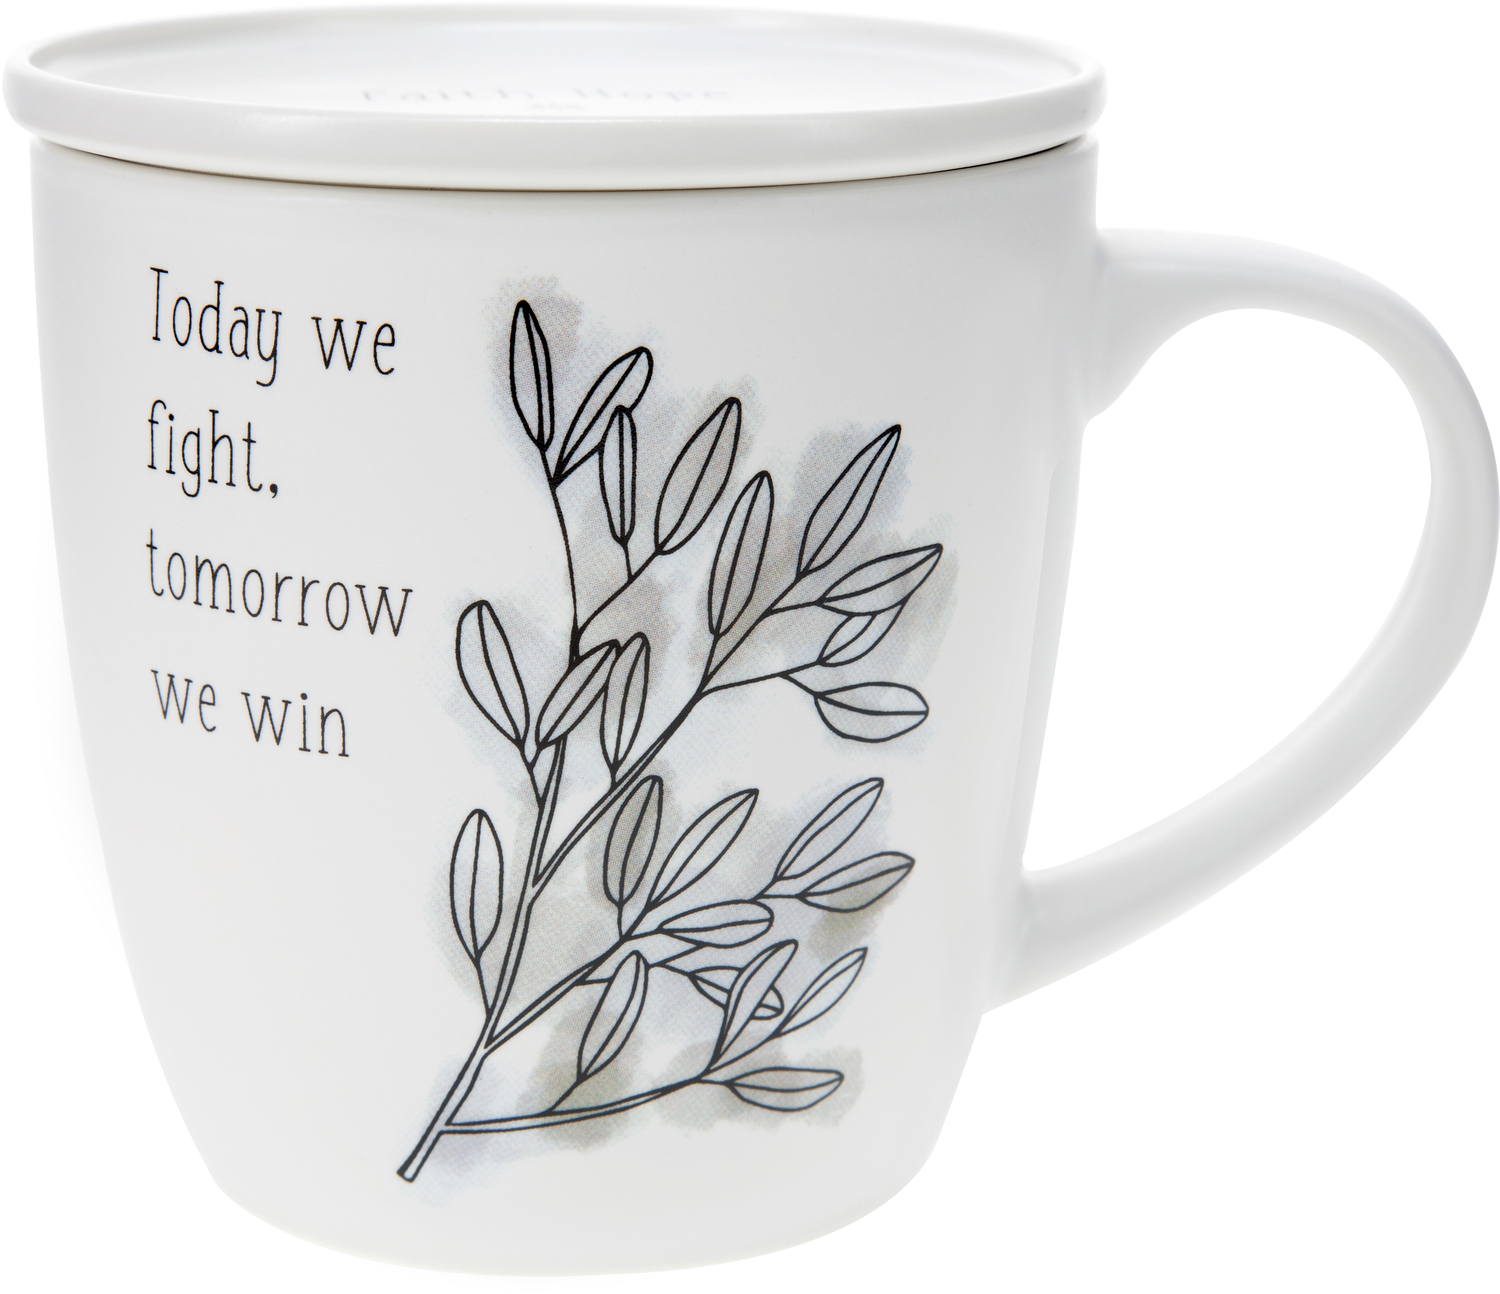 Today We Fight by Faith Hope and Healing - Today We Fight - 17 oz Cup with Coaster Lid